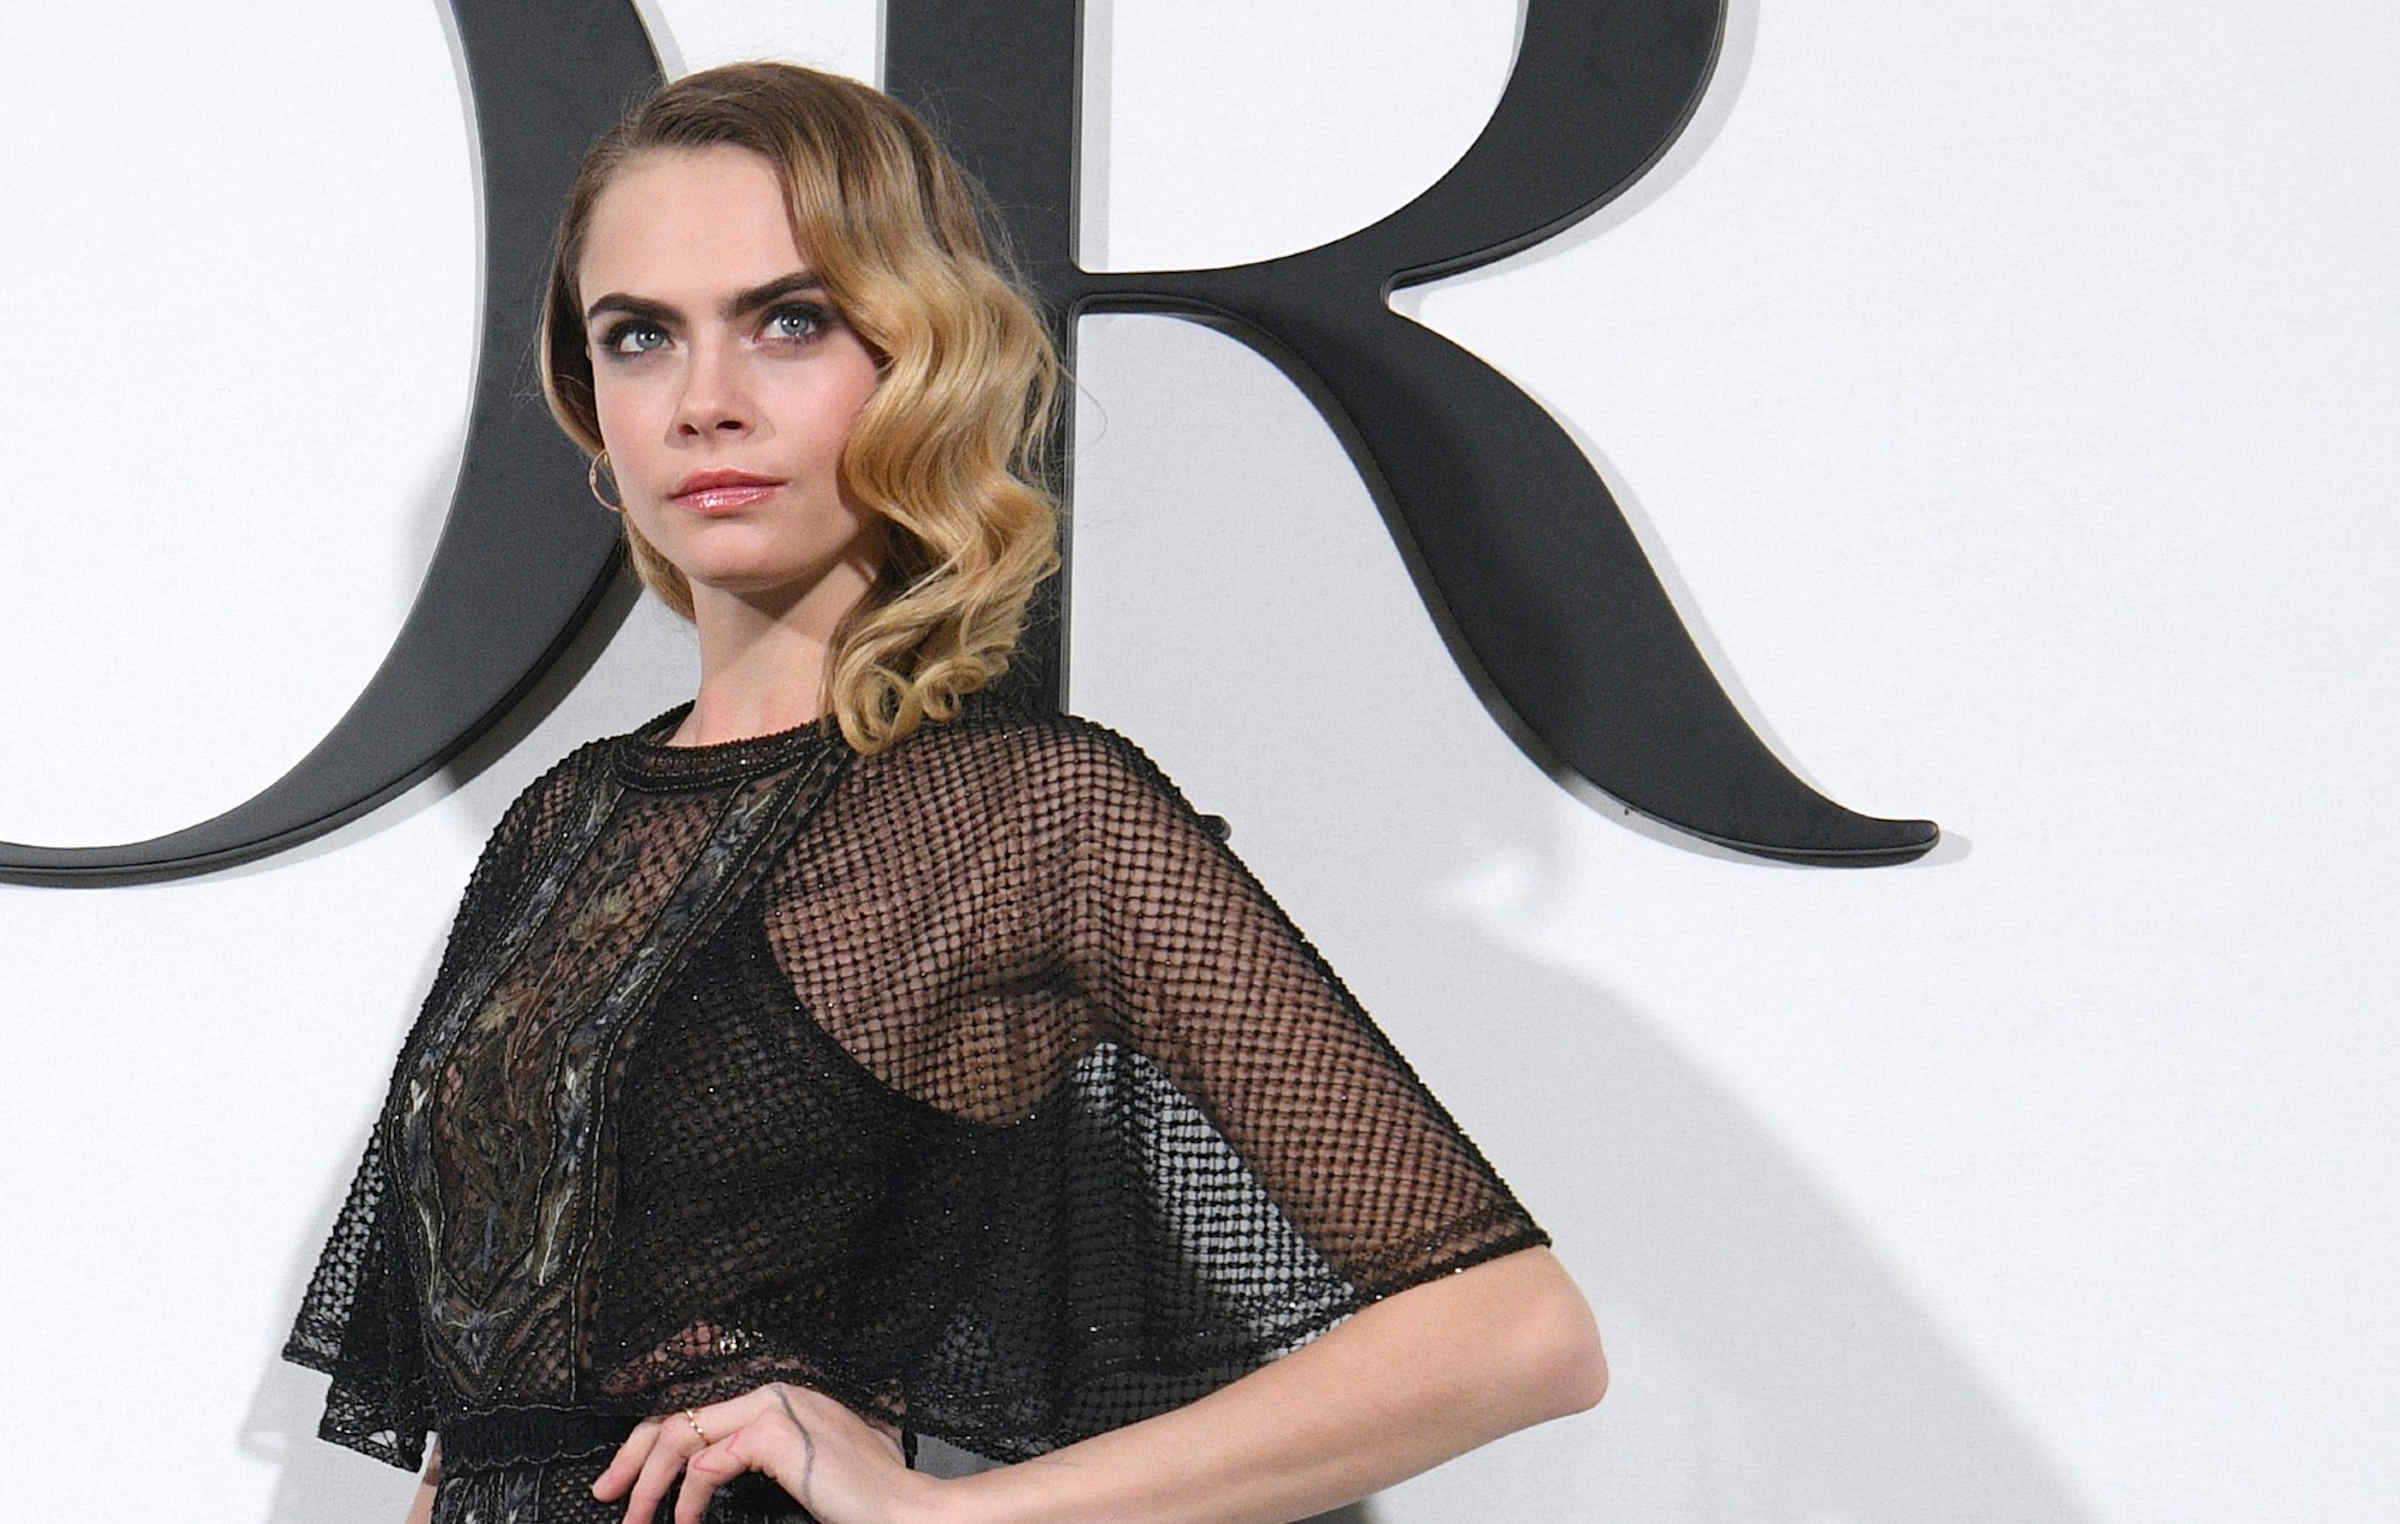 Why On Earth Has Hulu Given Cara Delevingne Her Own T